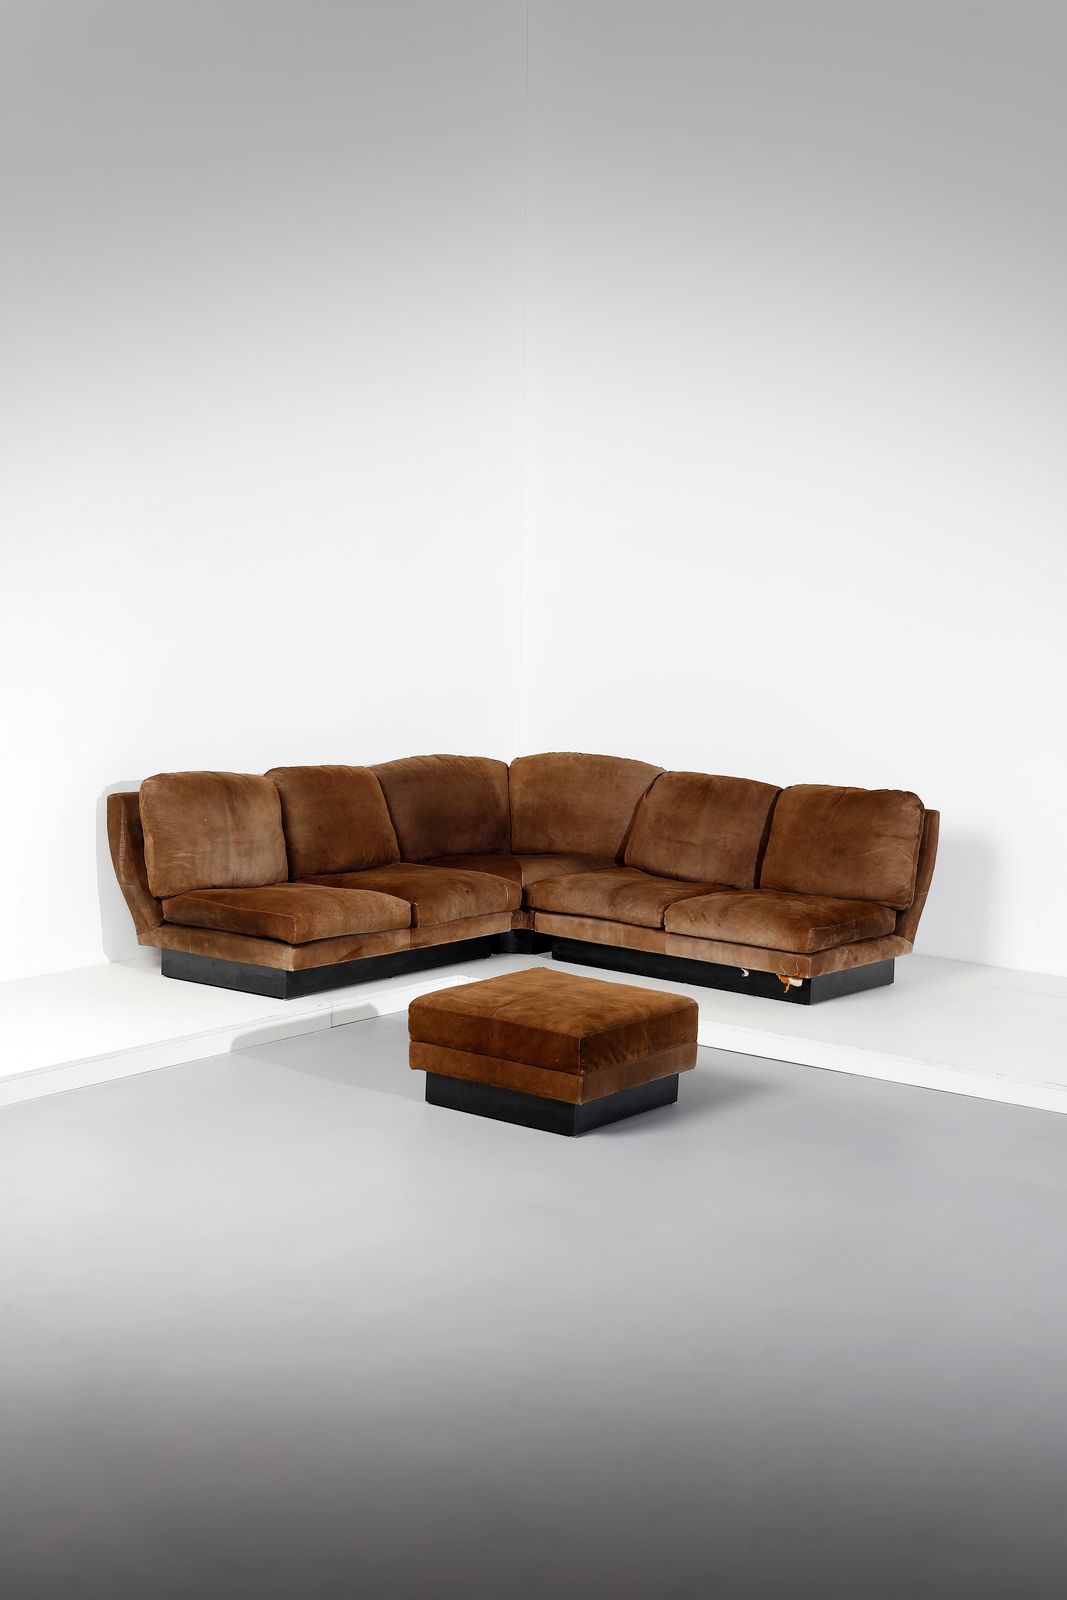 RIZZO WILLY (1928 - 2013) RIZZO WILLY (1928 - 2013). Modulares Sofa. Literatur: &hellip;